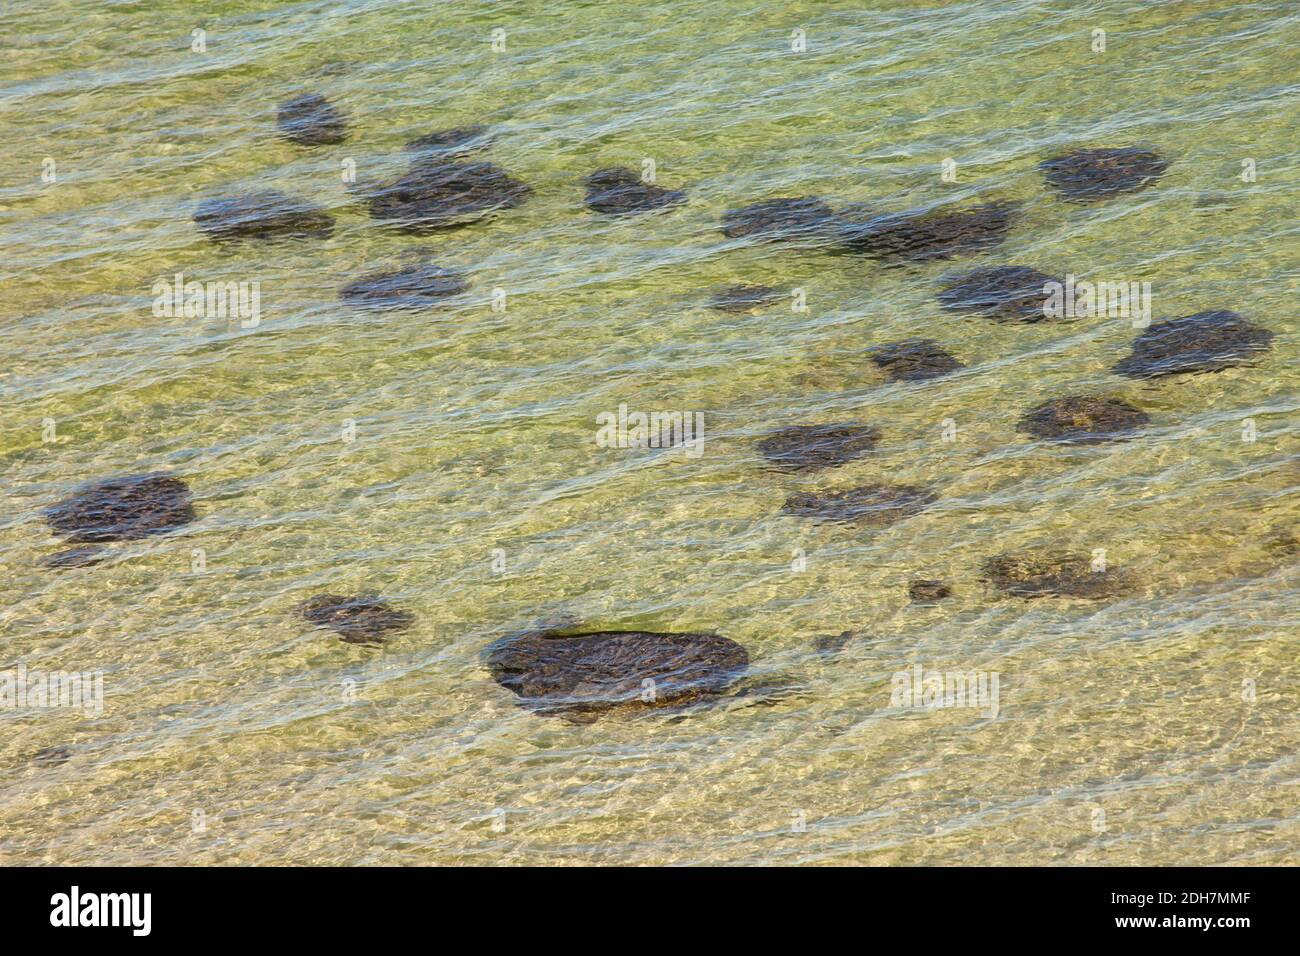 Dark rocks under surface of water, conceptual Stock Photo